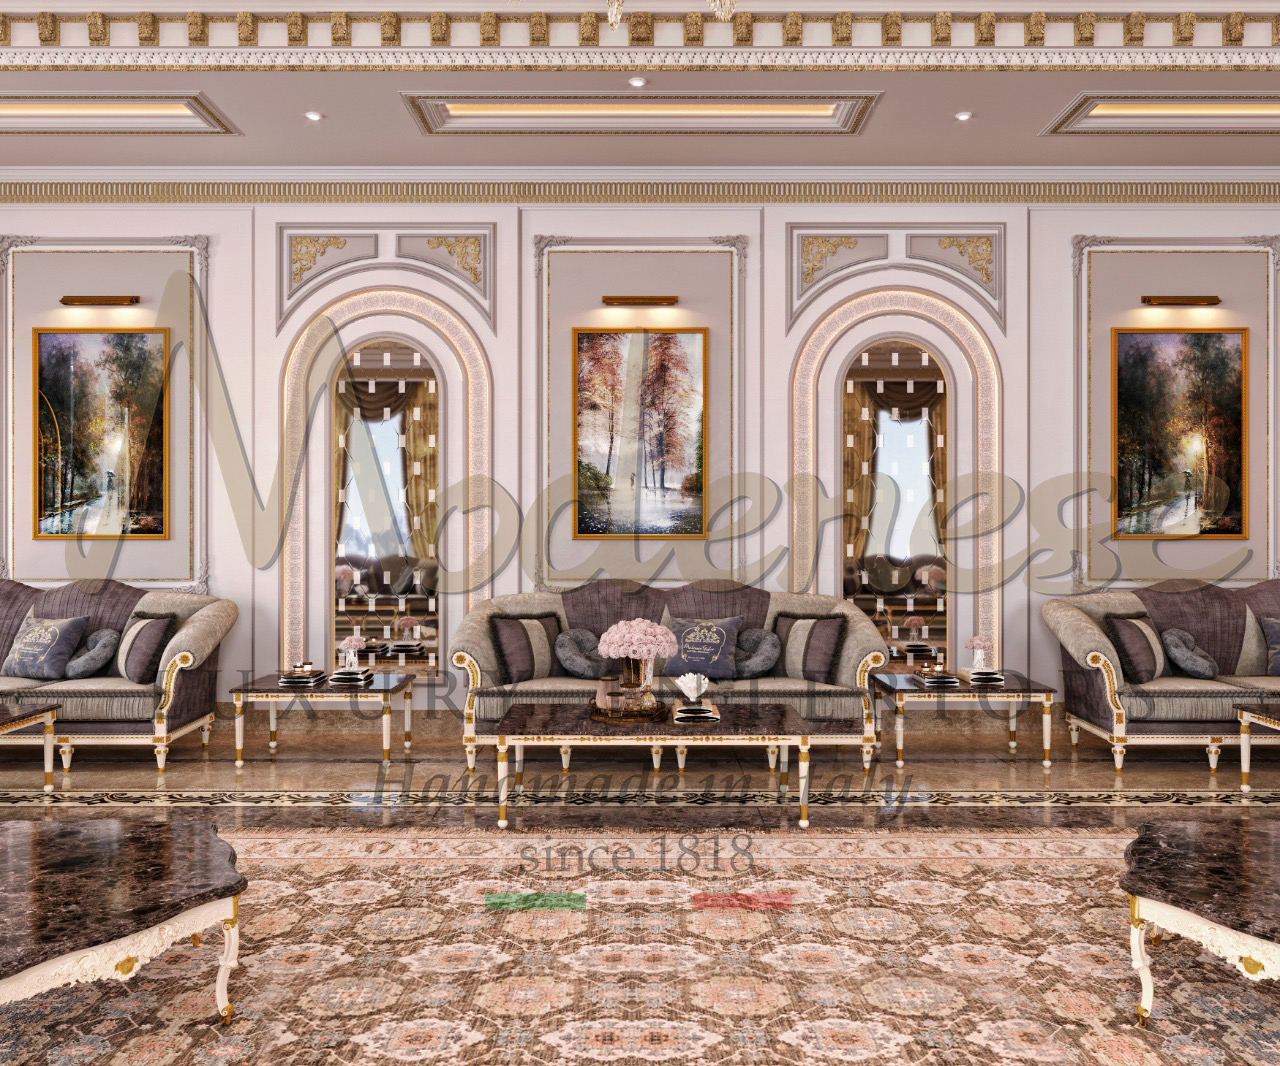 Luxury Classic Majlis Design For Luxurious Villa in Mecca. Hand-made Furniture Made By Artisans From Italy